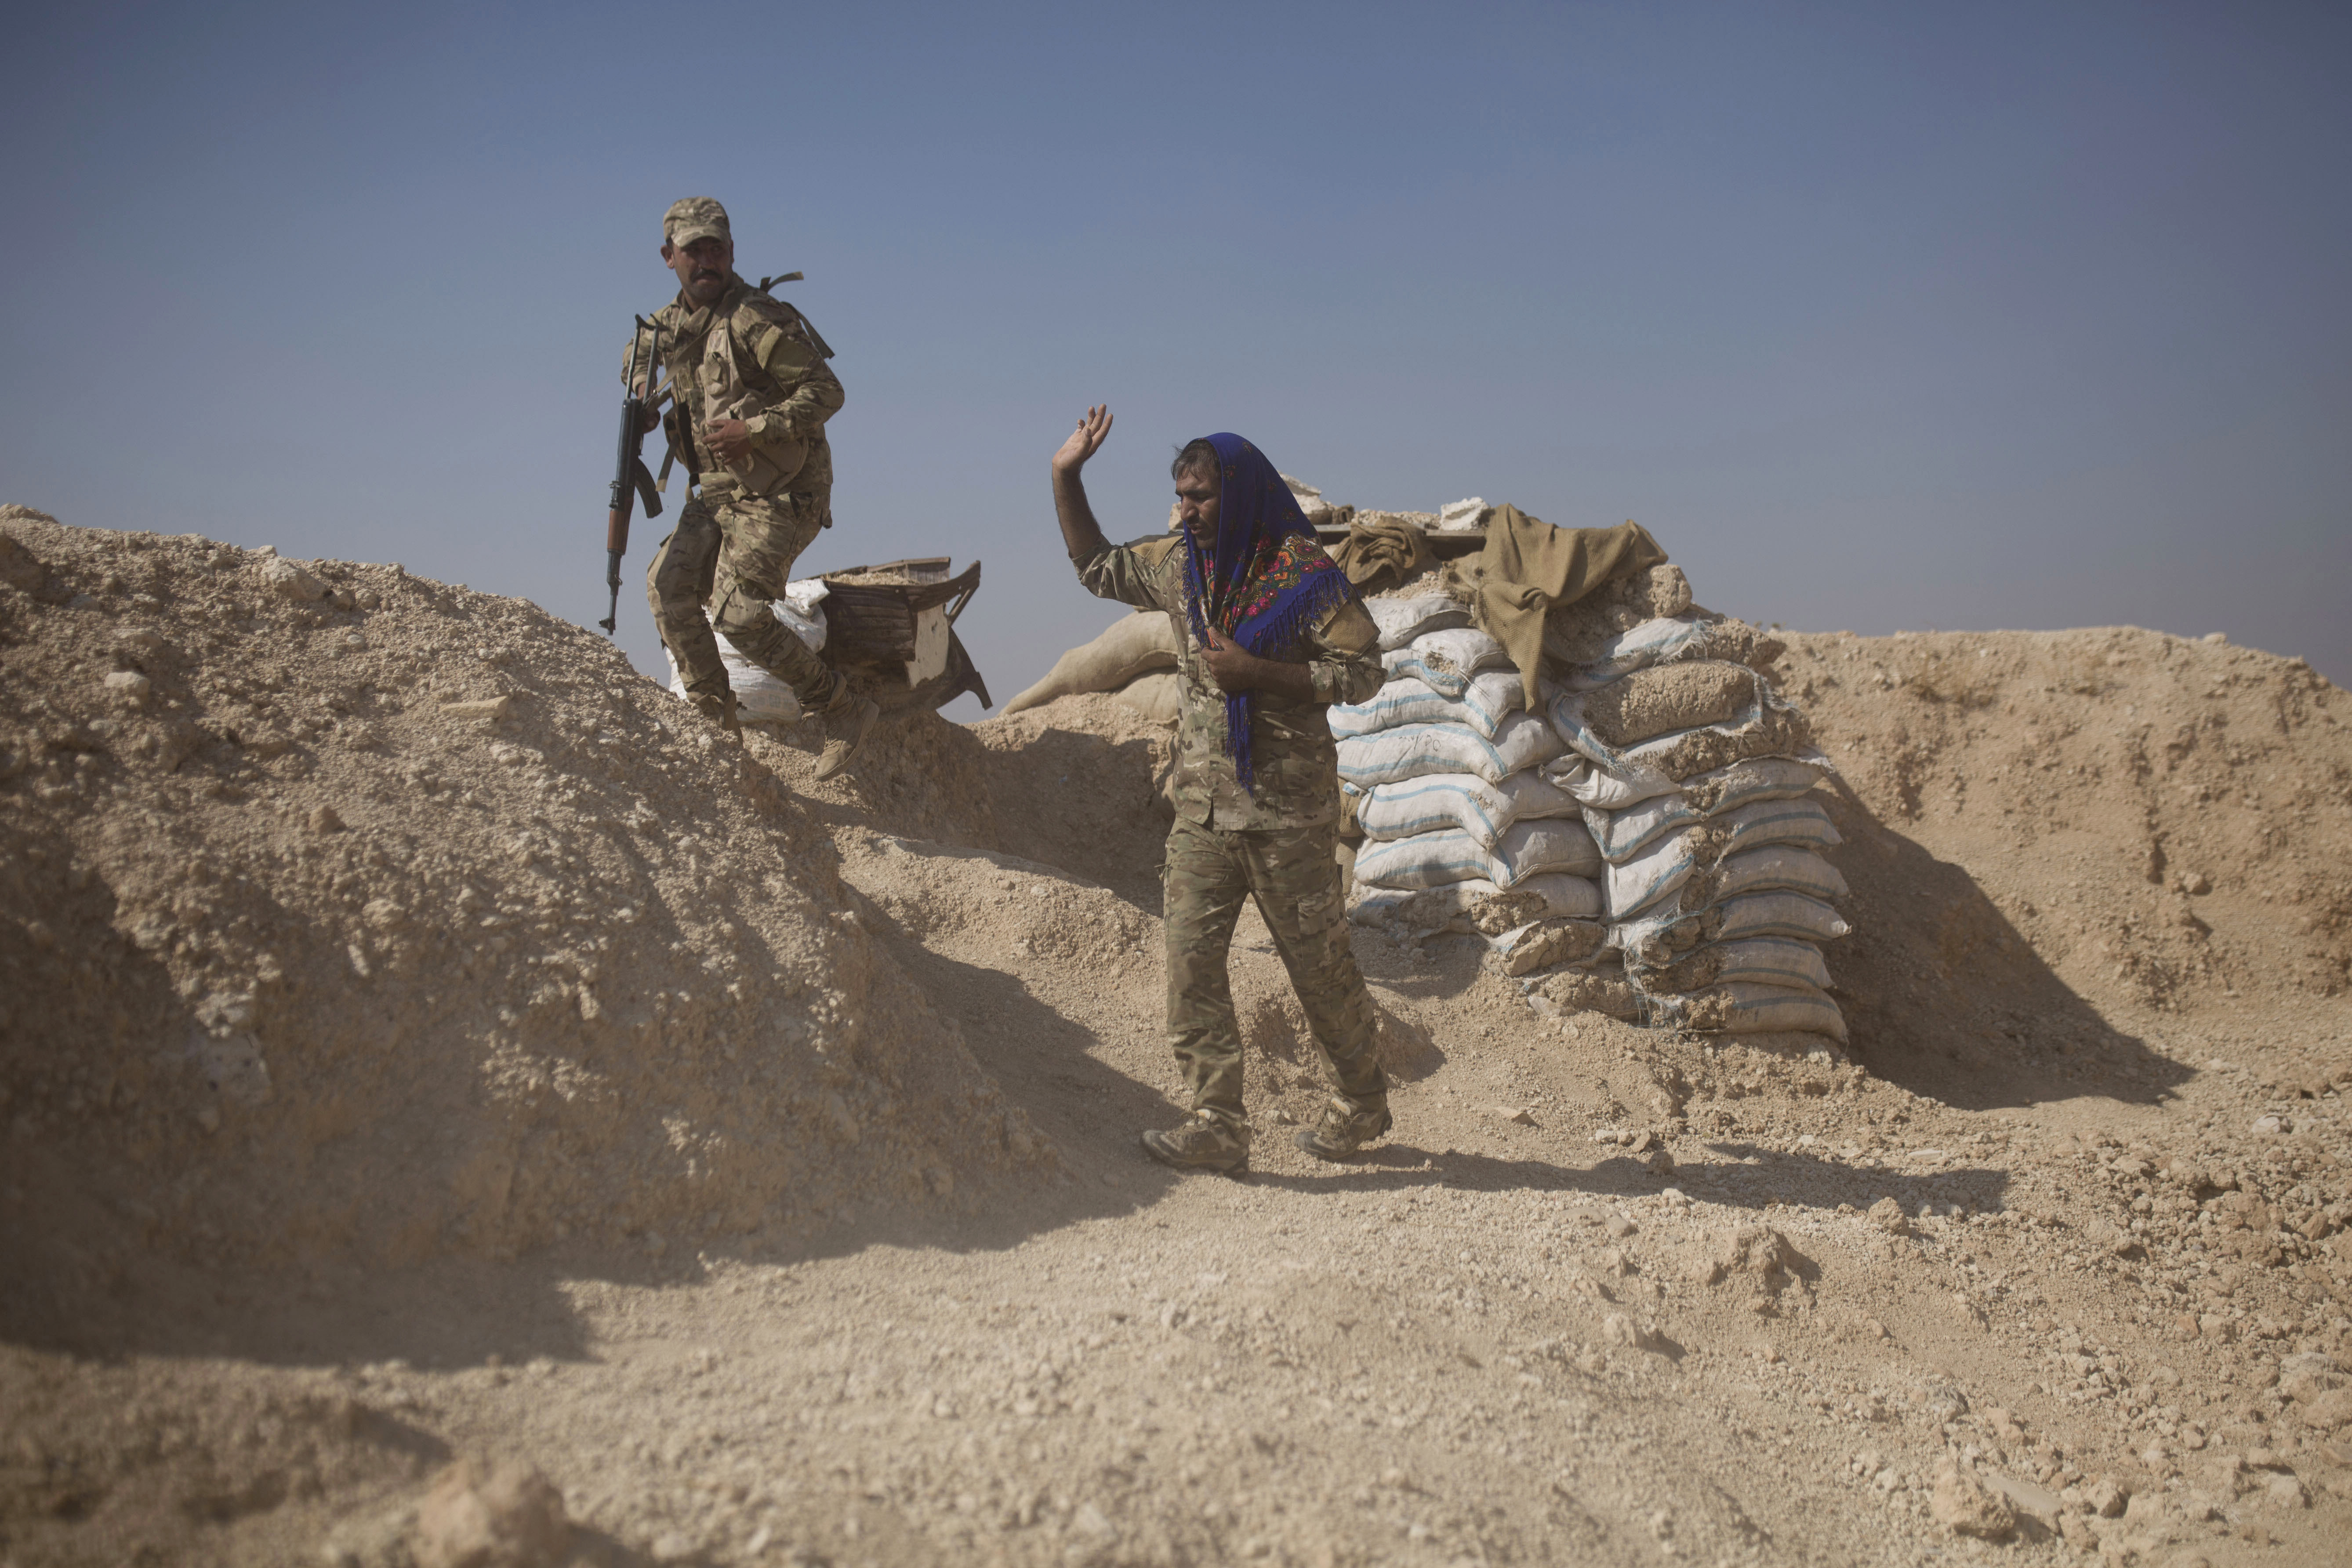 A member of the Tal Abyad Military Council, an affiliate of the U.S.-backed Syrian Democratic Forces, waves a comrade away from his post before collapsing the site in the safe zone between Syria and the Turkish border near Tal Abyad, Syria, Friday, Sept. 6, 2019. Once part of the sprawling territories controlled by the Islamic State group, the villages are under threat of an attack from Turkey which considers their liberators, the U.S-backed Syrian Kurdish-led forces, terrorists.T o forestall violence between its two allies along the border it has helped clear of IS militants, Washington has upped its involvement in this part of Syria.. (AP Photo/Maya Alleruzzo)